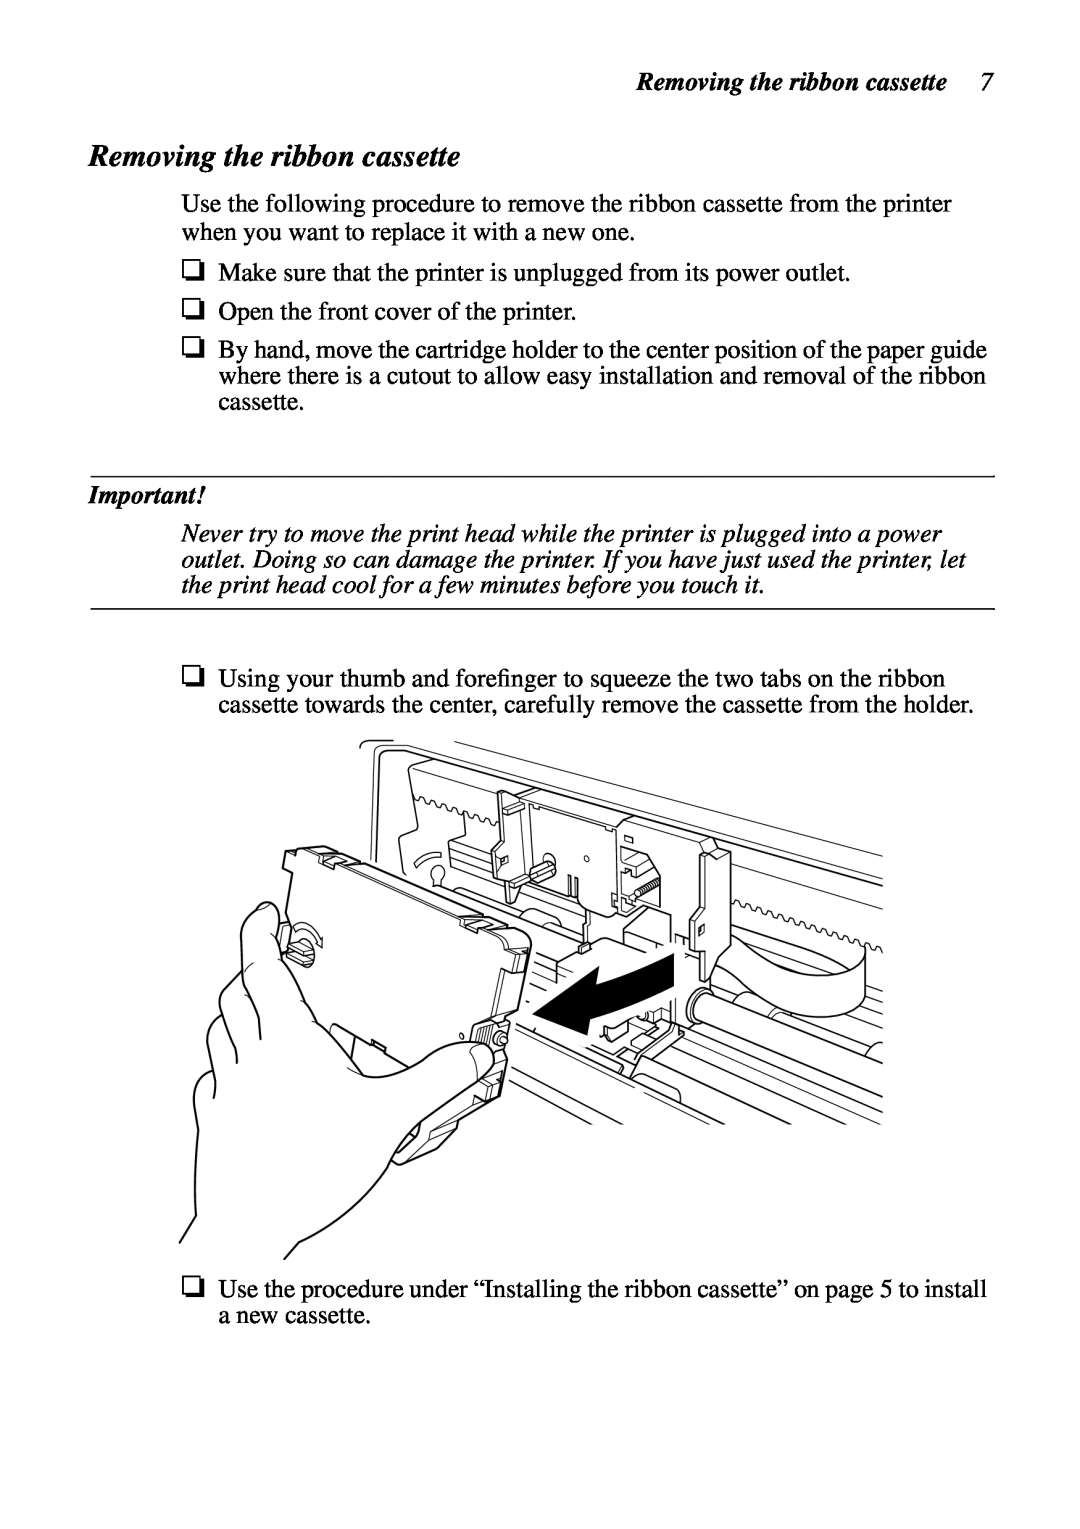 Star Micronics LC-7211 user manual Removing the ribbon cassette 